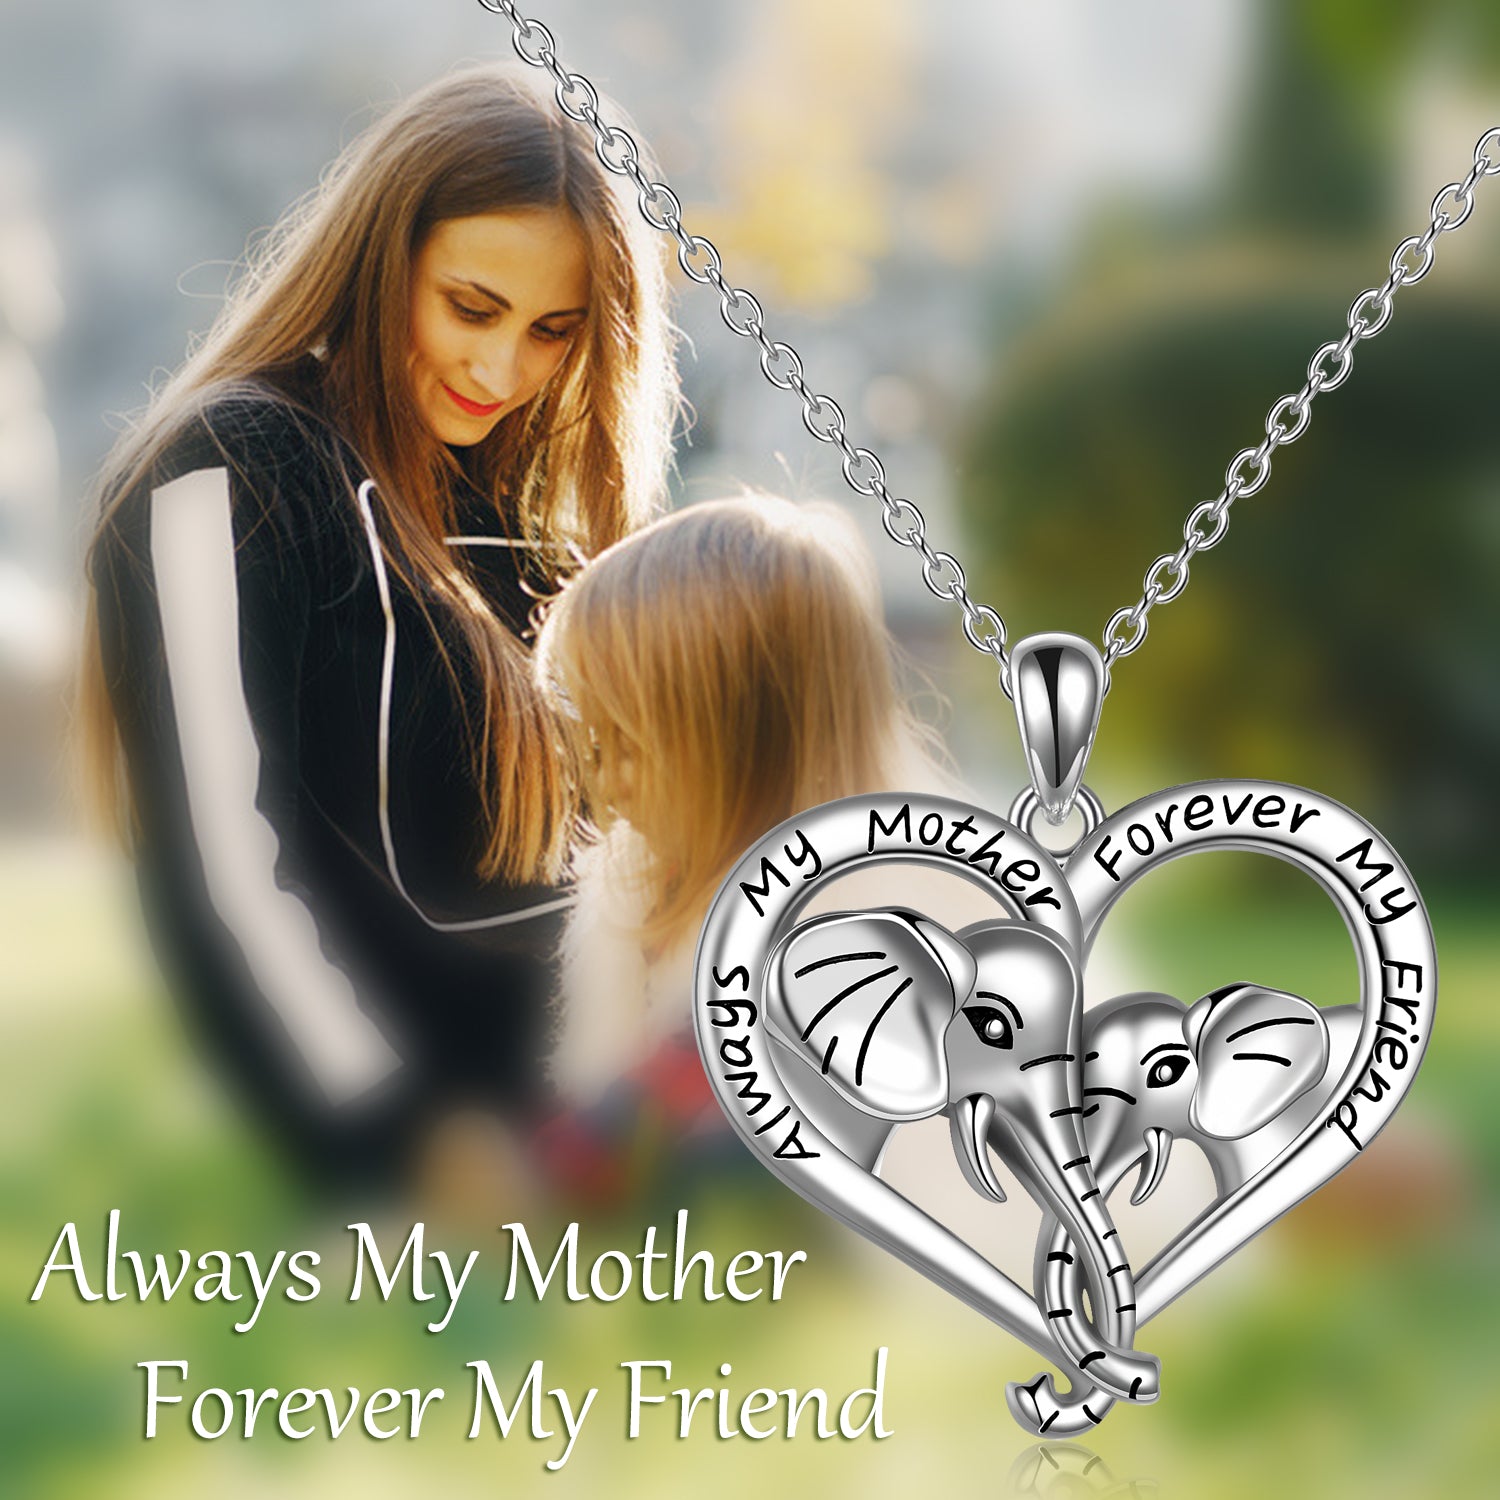 To My Ride Or Die Forever Love Necklace, I Will Love You Always - Sayings  into Things